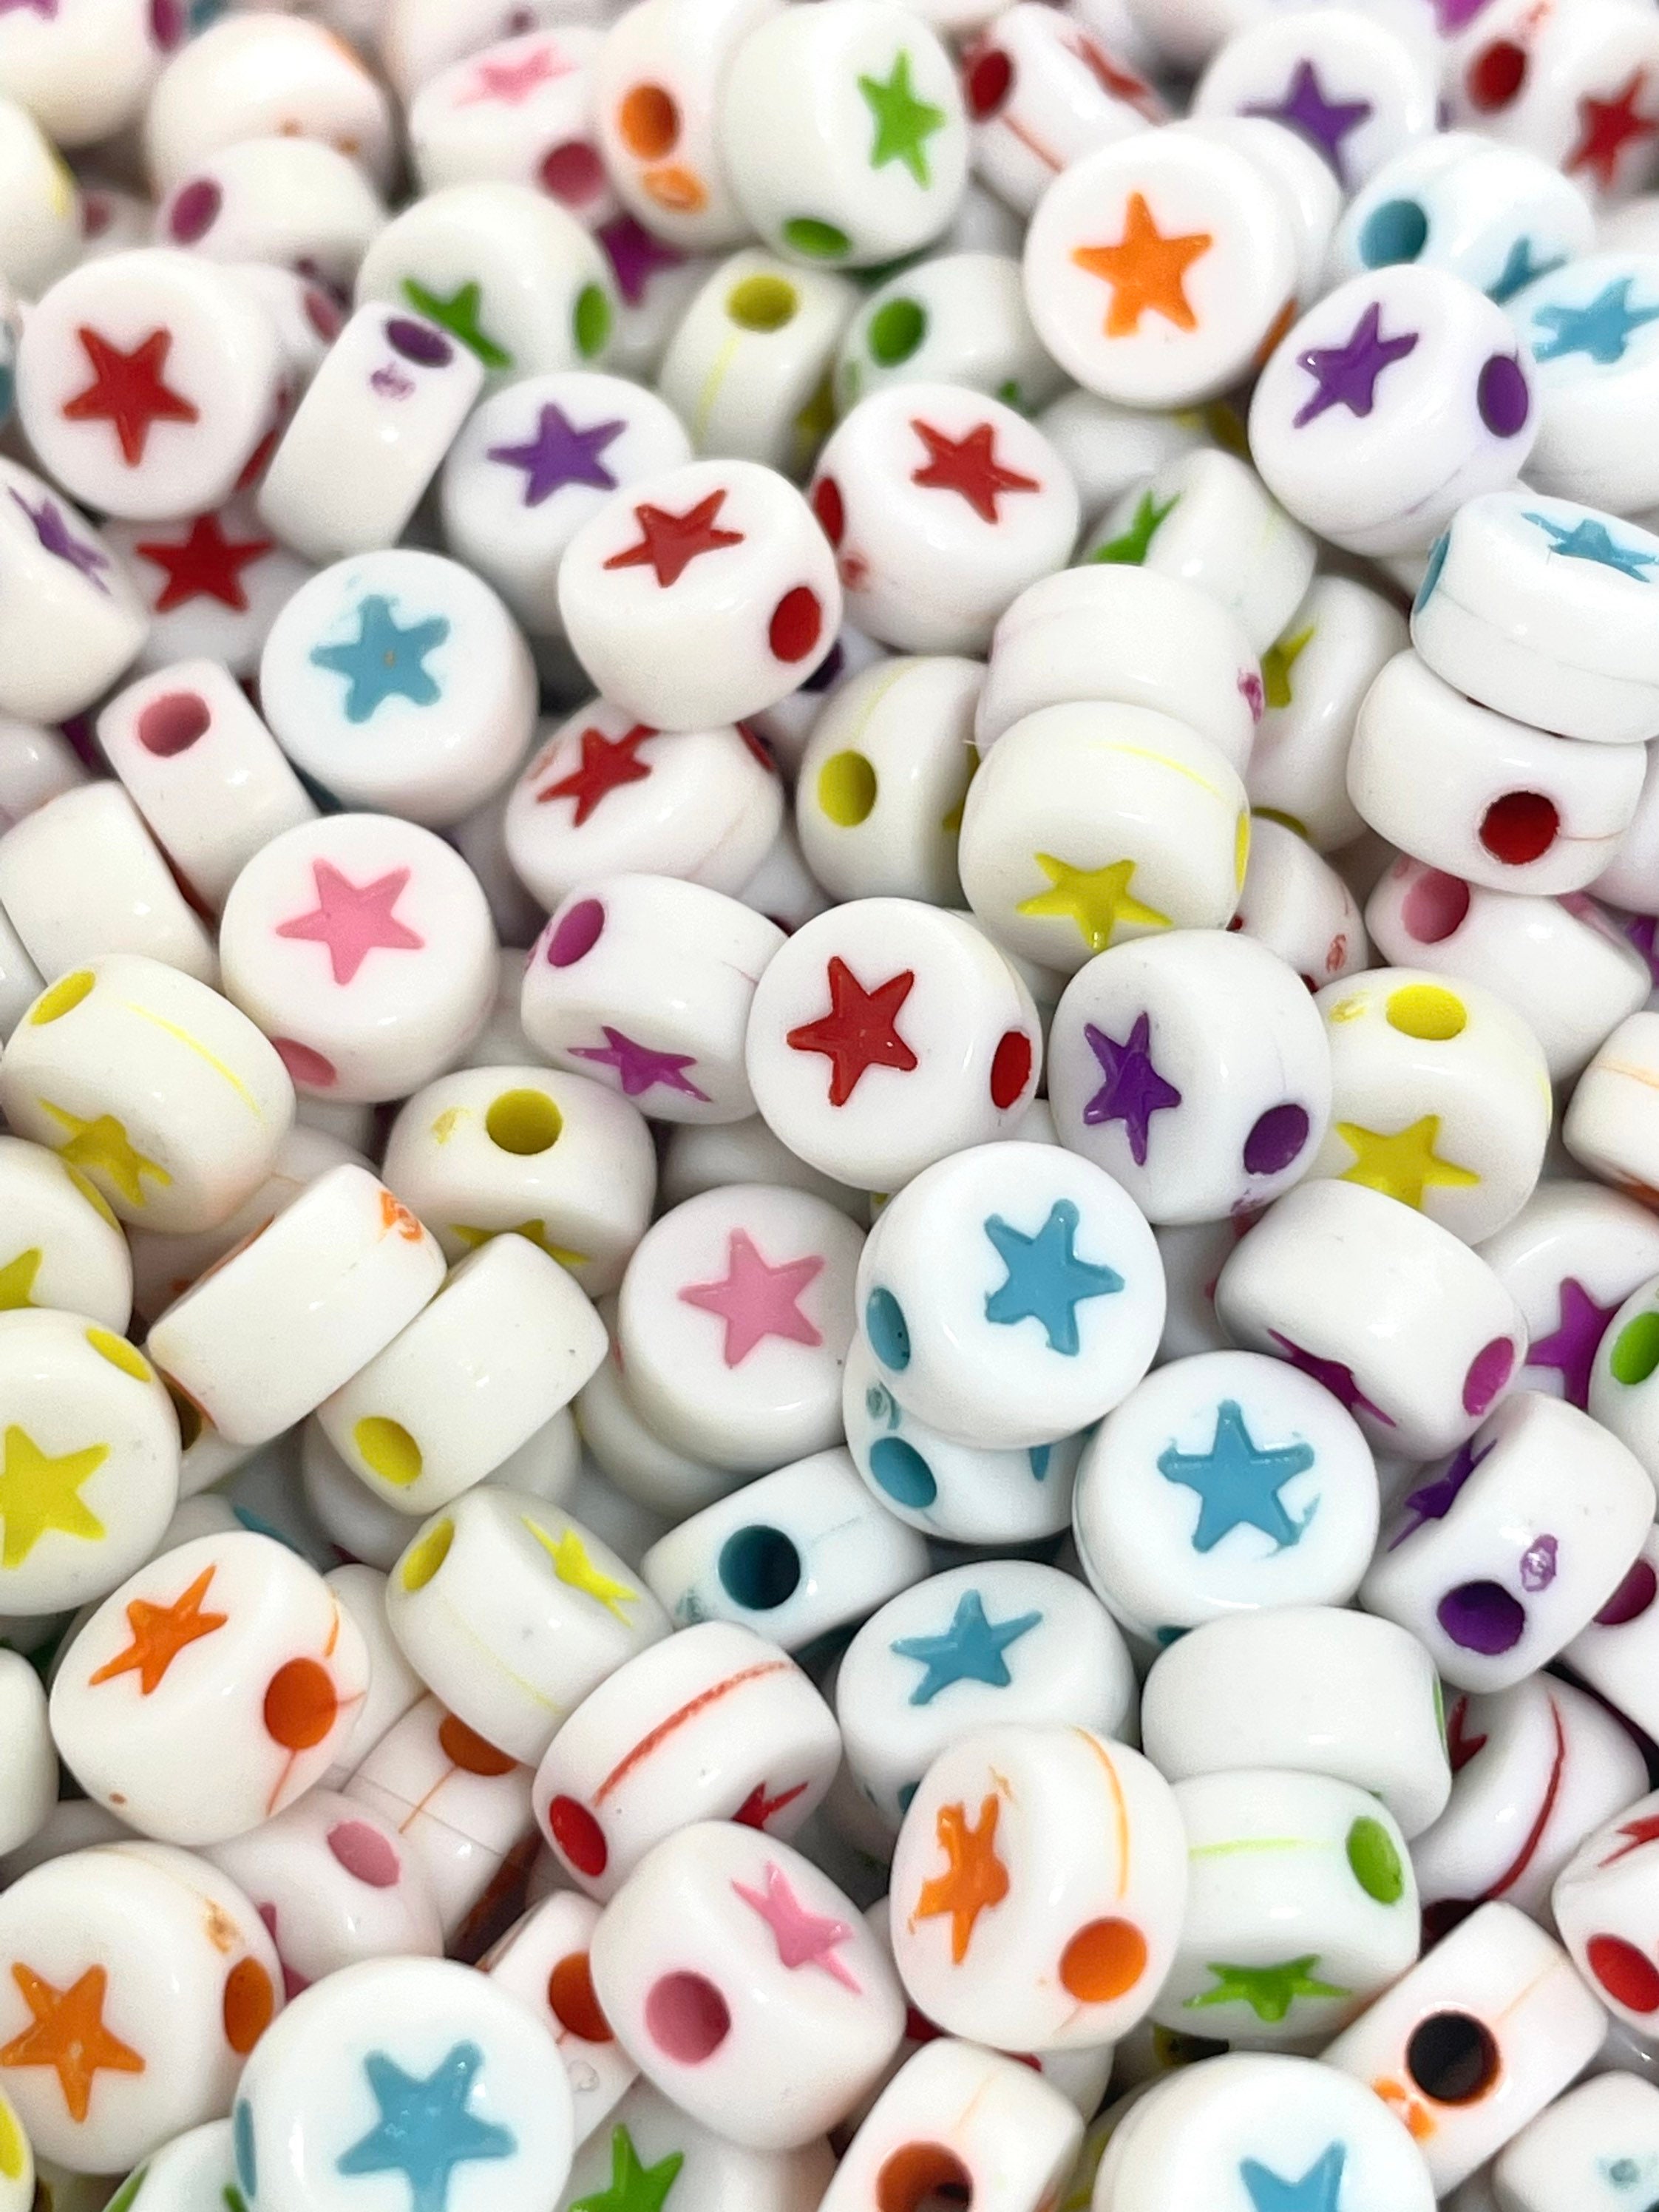 Rainbow Star Beads for Letter Jewelry, Spacer Beads for Alphabet